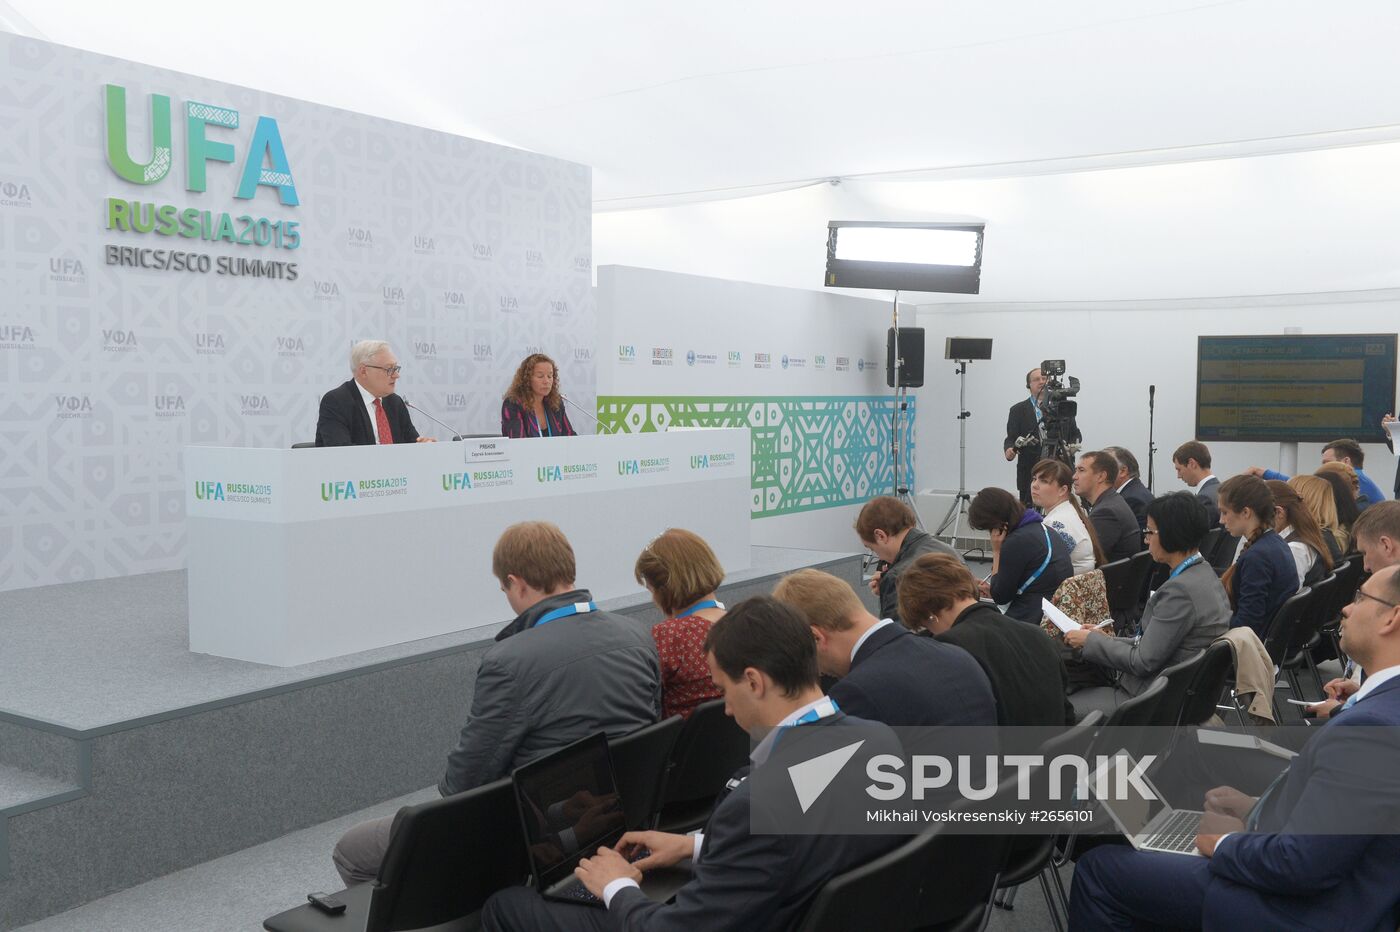 Press briefing by Sergei Ryabkov, Deputy Minister of Foreign Affairs of the Russian Federation, Russia's BRICS Sherpa